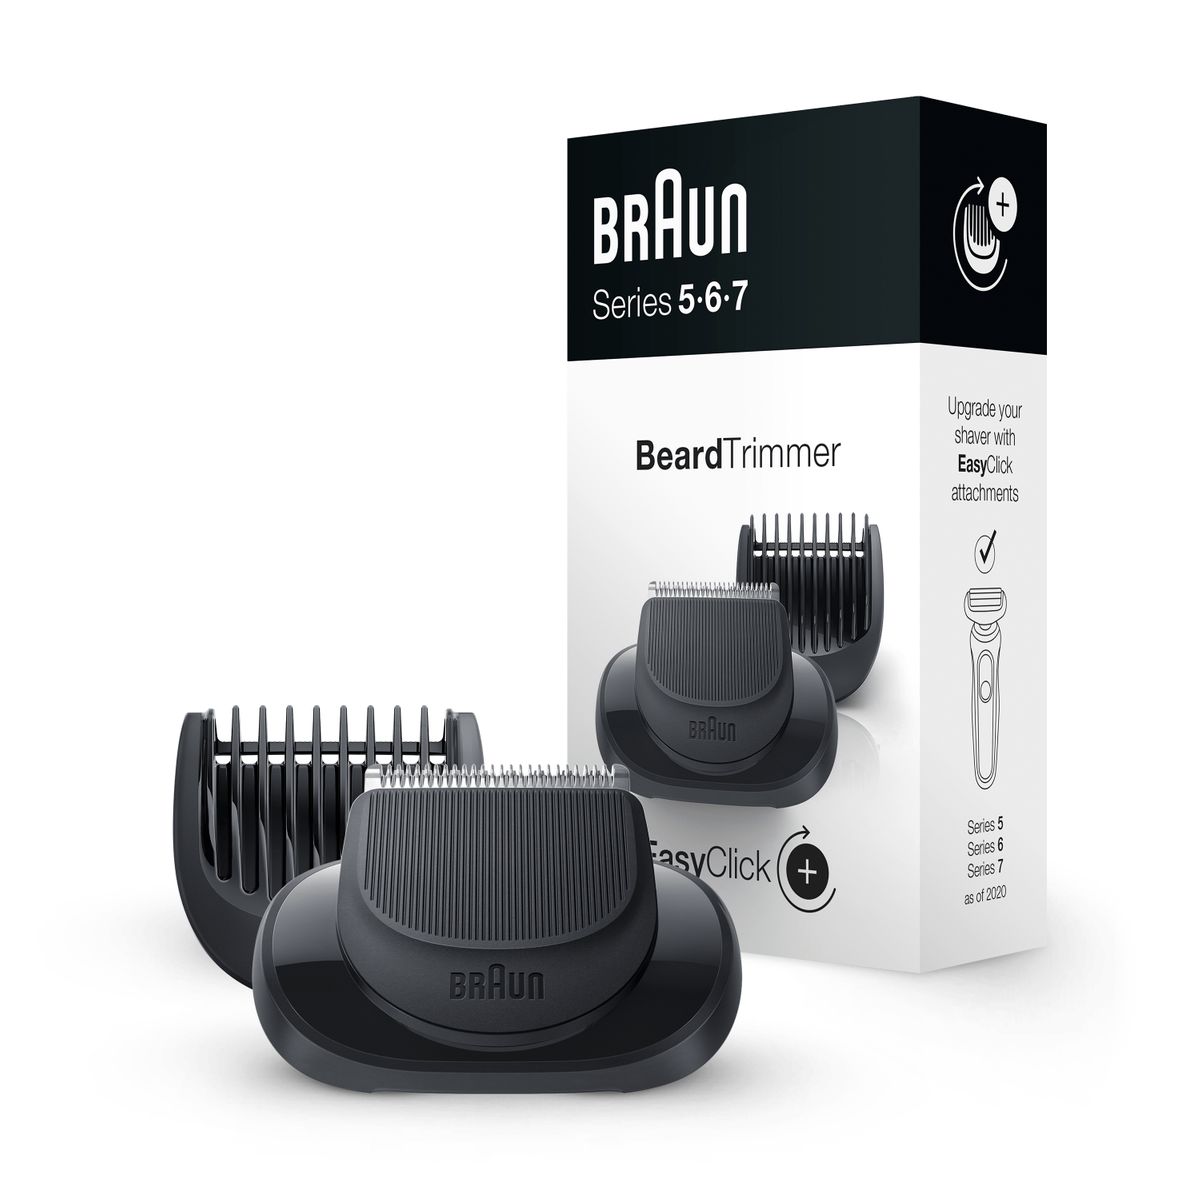 Braun EasyClick beard trimmer attachment for shaver men, compatible with Series 5, 6 and 7 electric shavers (shaver models from 2020) Beard Trimmer Single